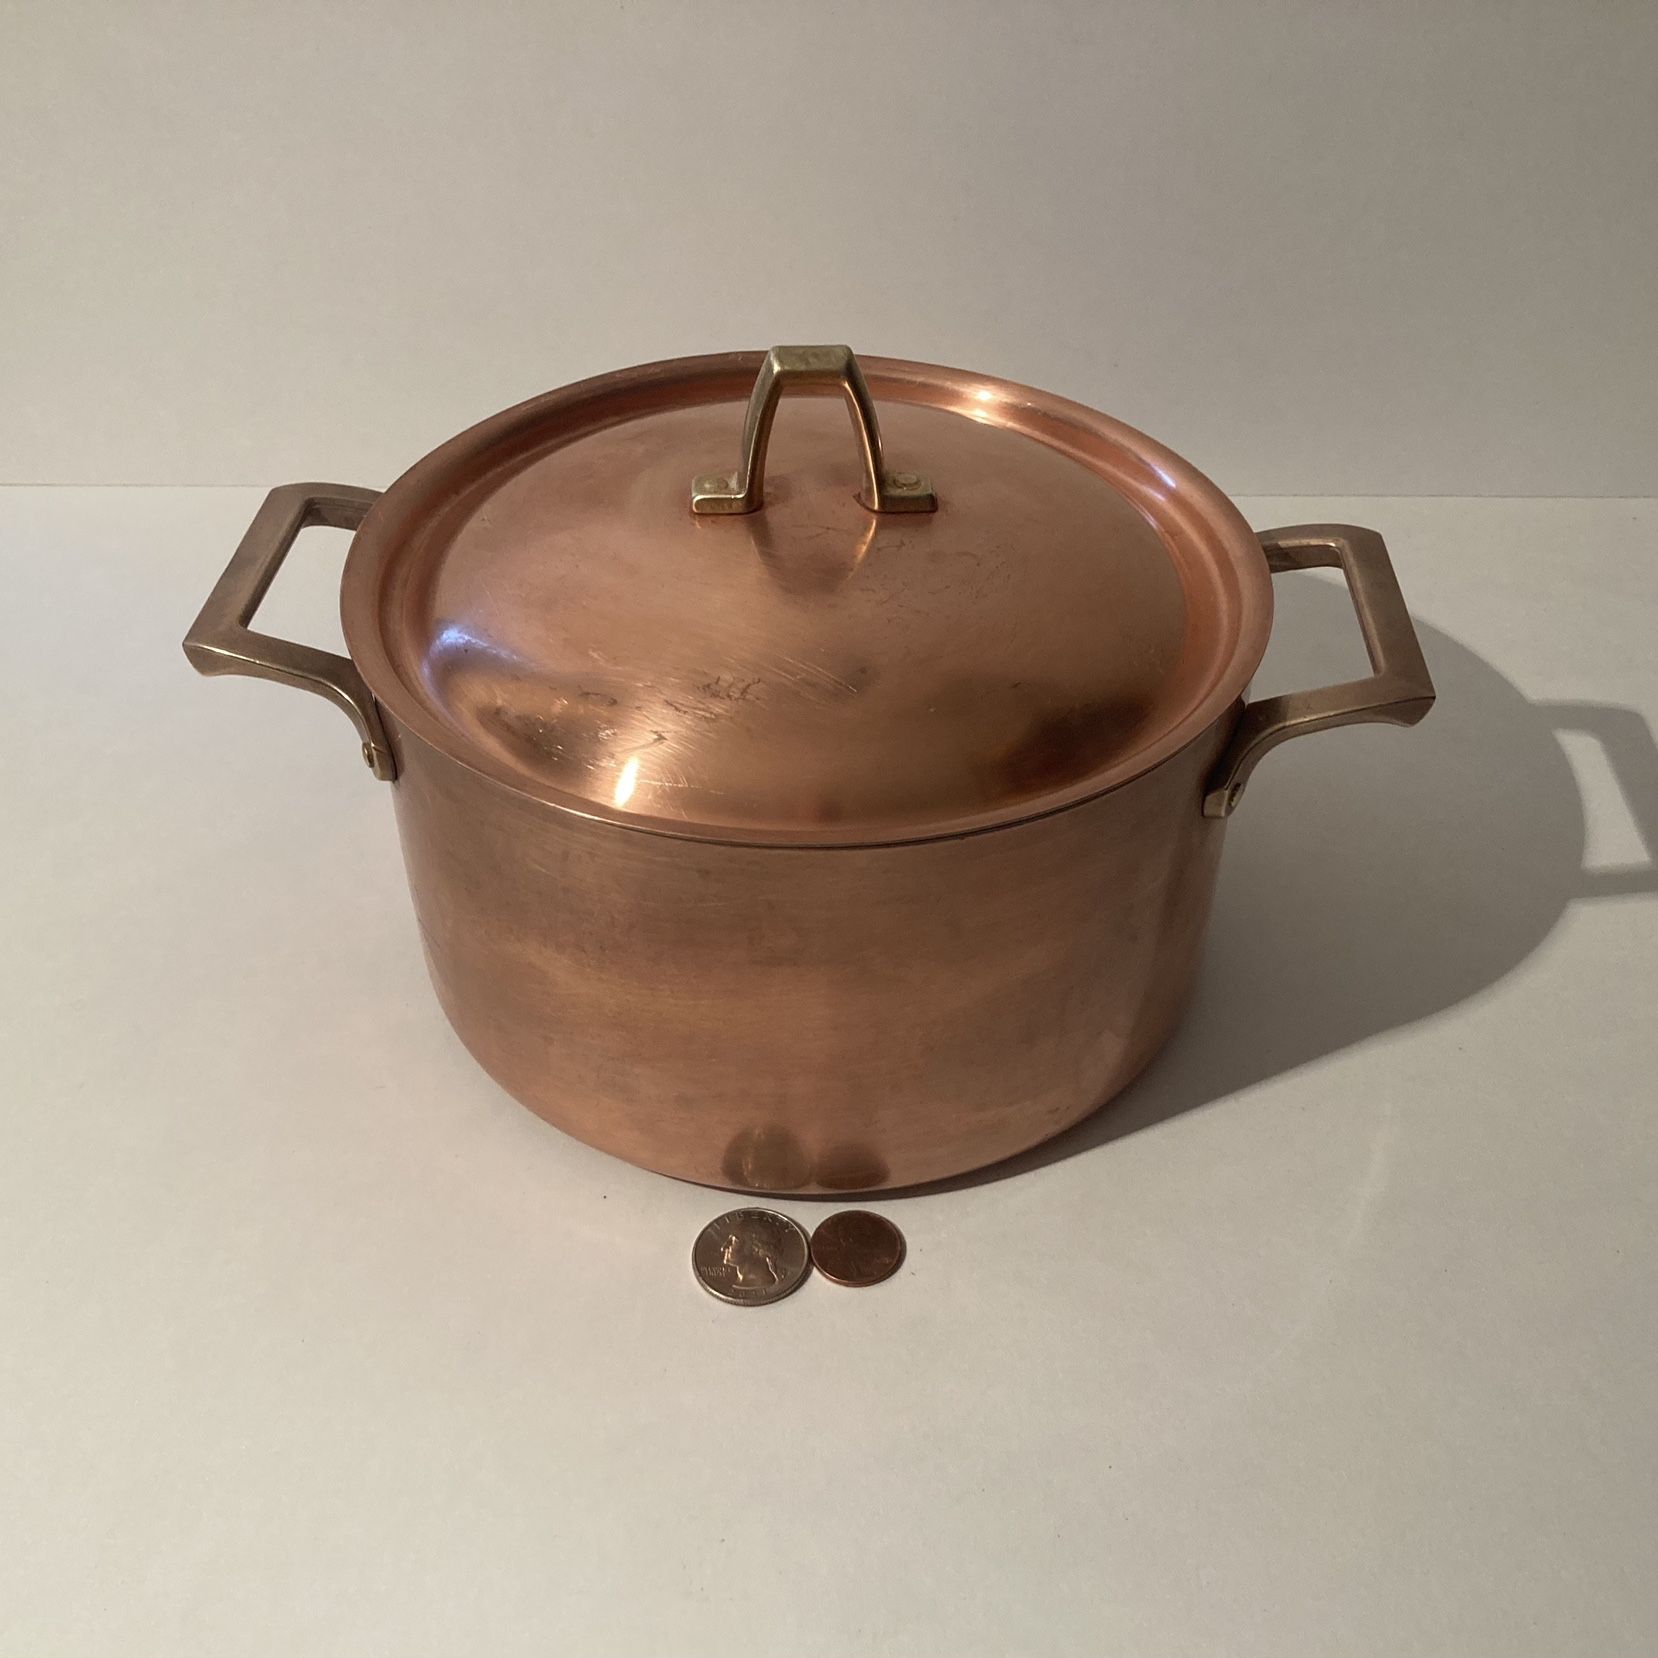 Vintage Revere Ware Copper Bottom Cookware Set - 13 Pieces for Sale in  Kent, WA - OfferUp